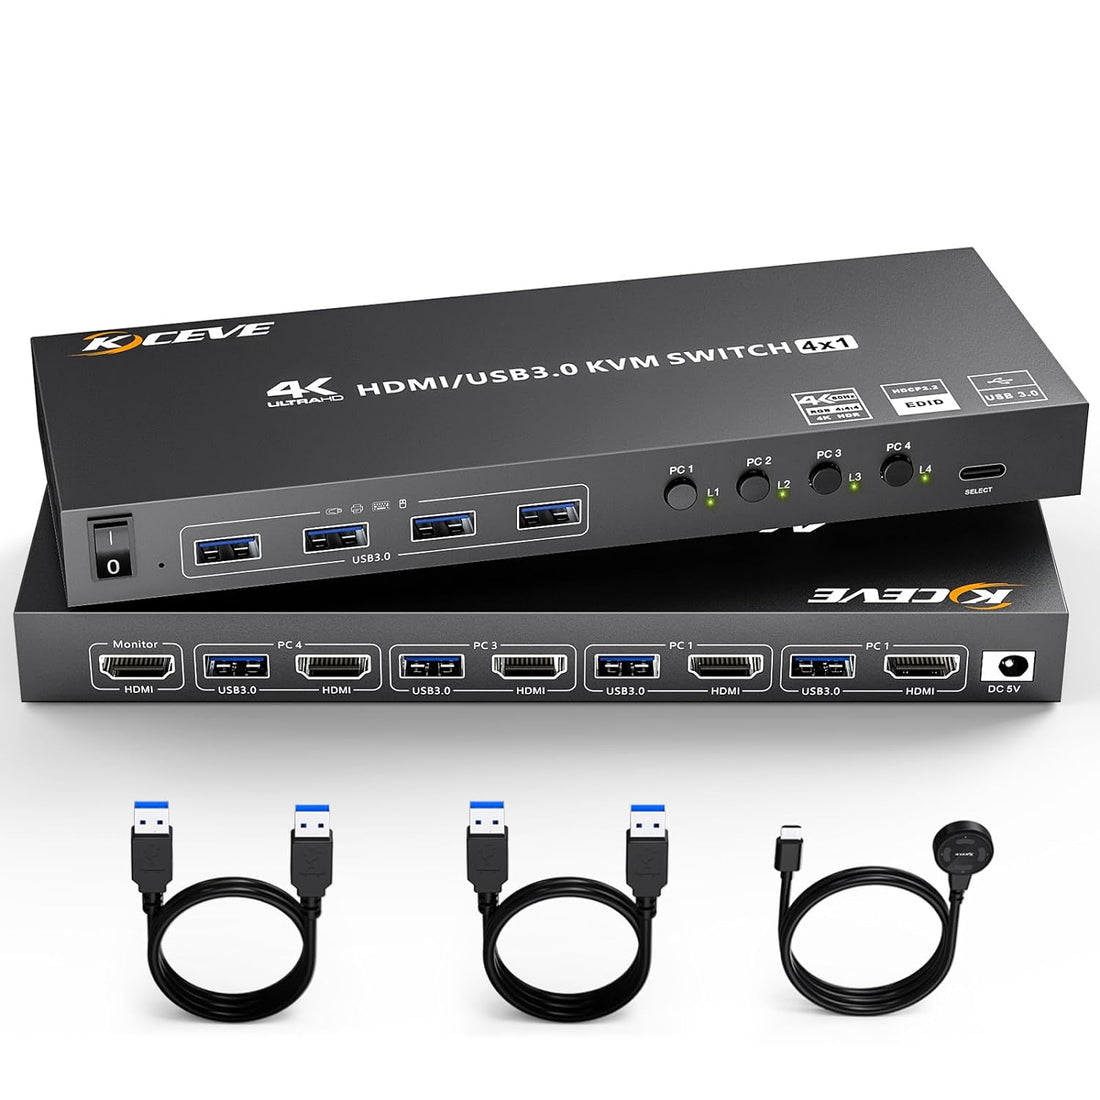 USB 3.0 HDMI KVM Switch, 4 Ports KVM Switcher Selector Box with EDID Emulator Function, Support 4K@60Hz Resolution for 4 Computers Share Mouse Keyboard and Monitor